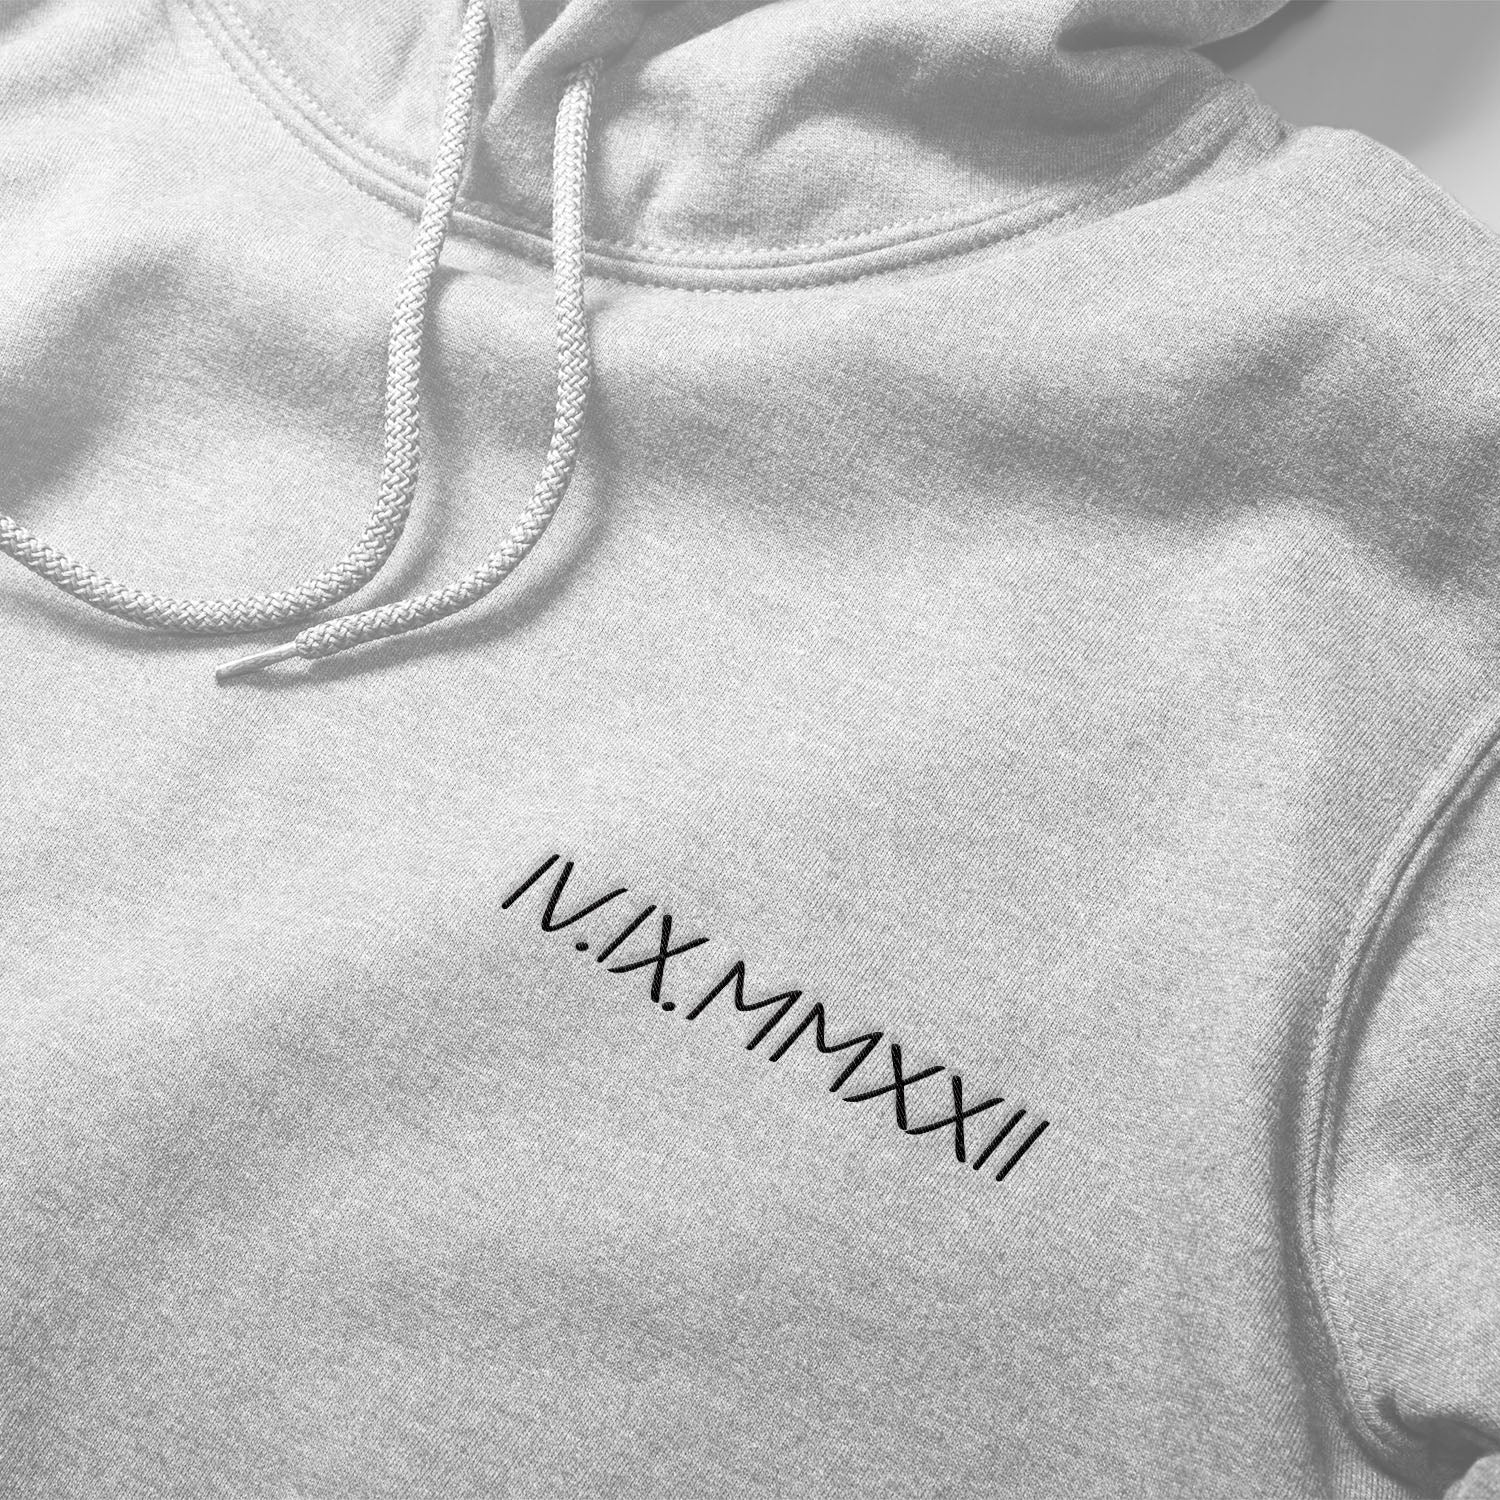 Personalized Hoodie Embroidered With Roman Numbers And Initial